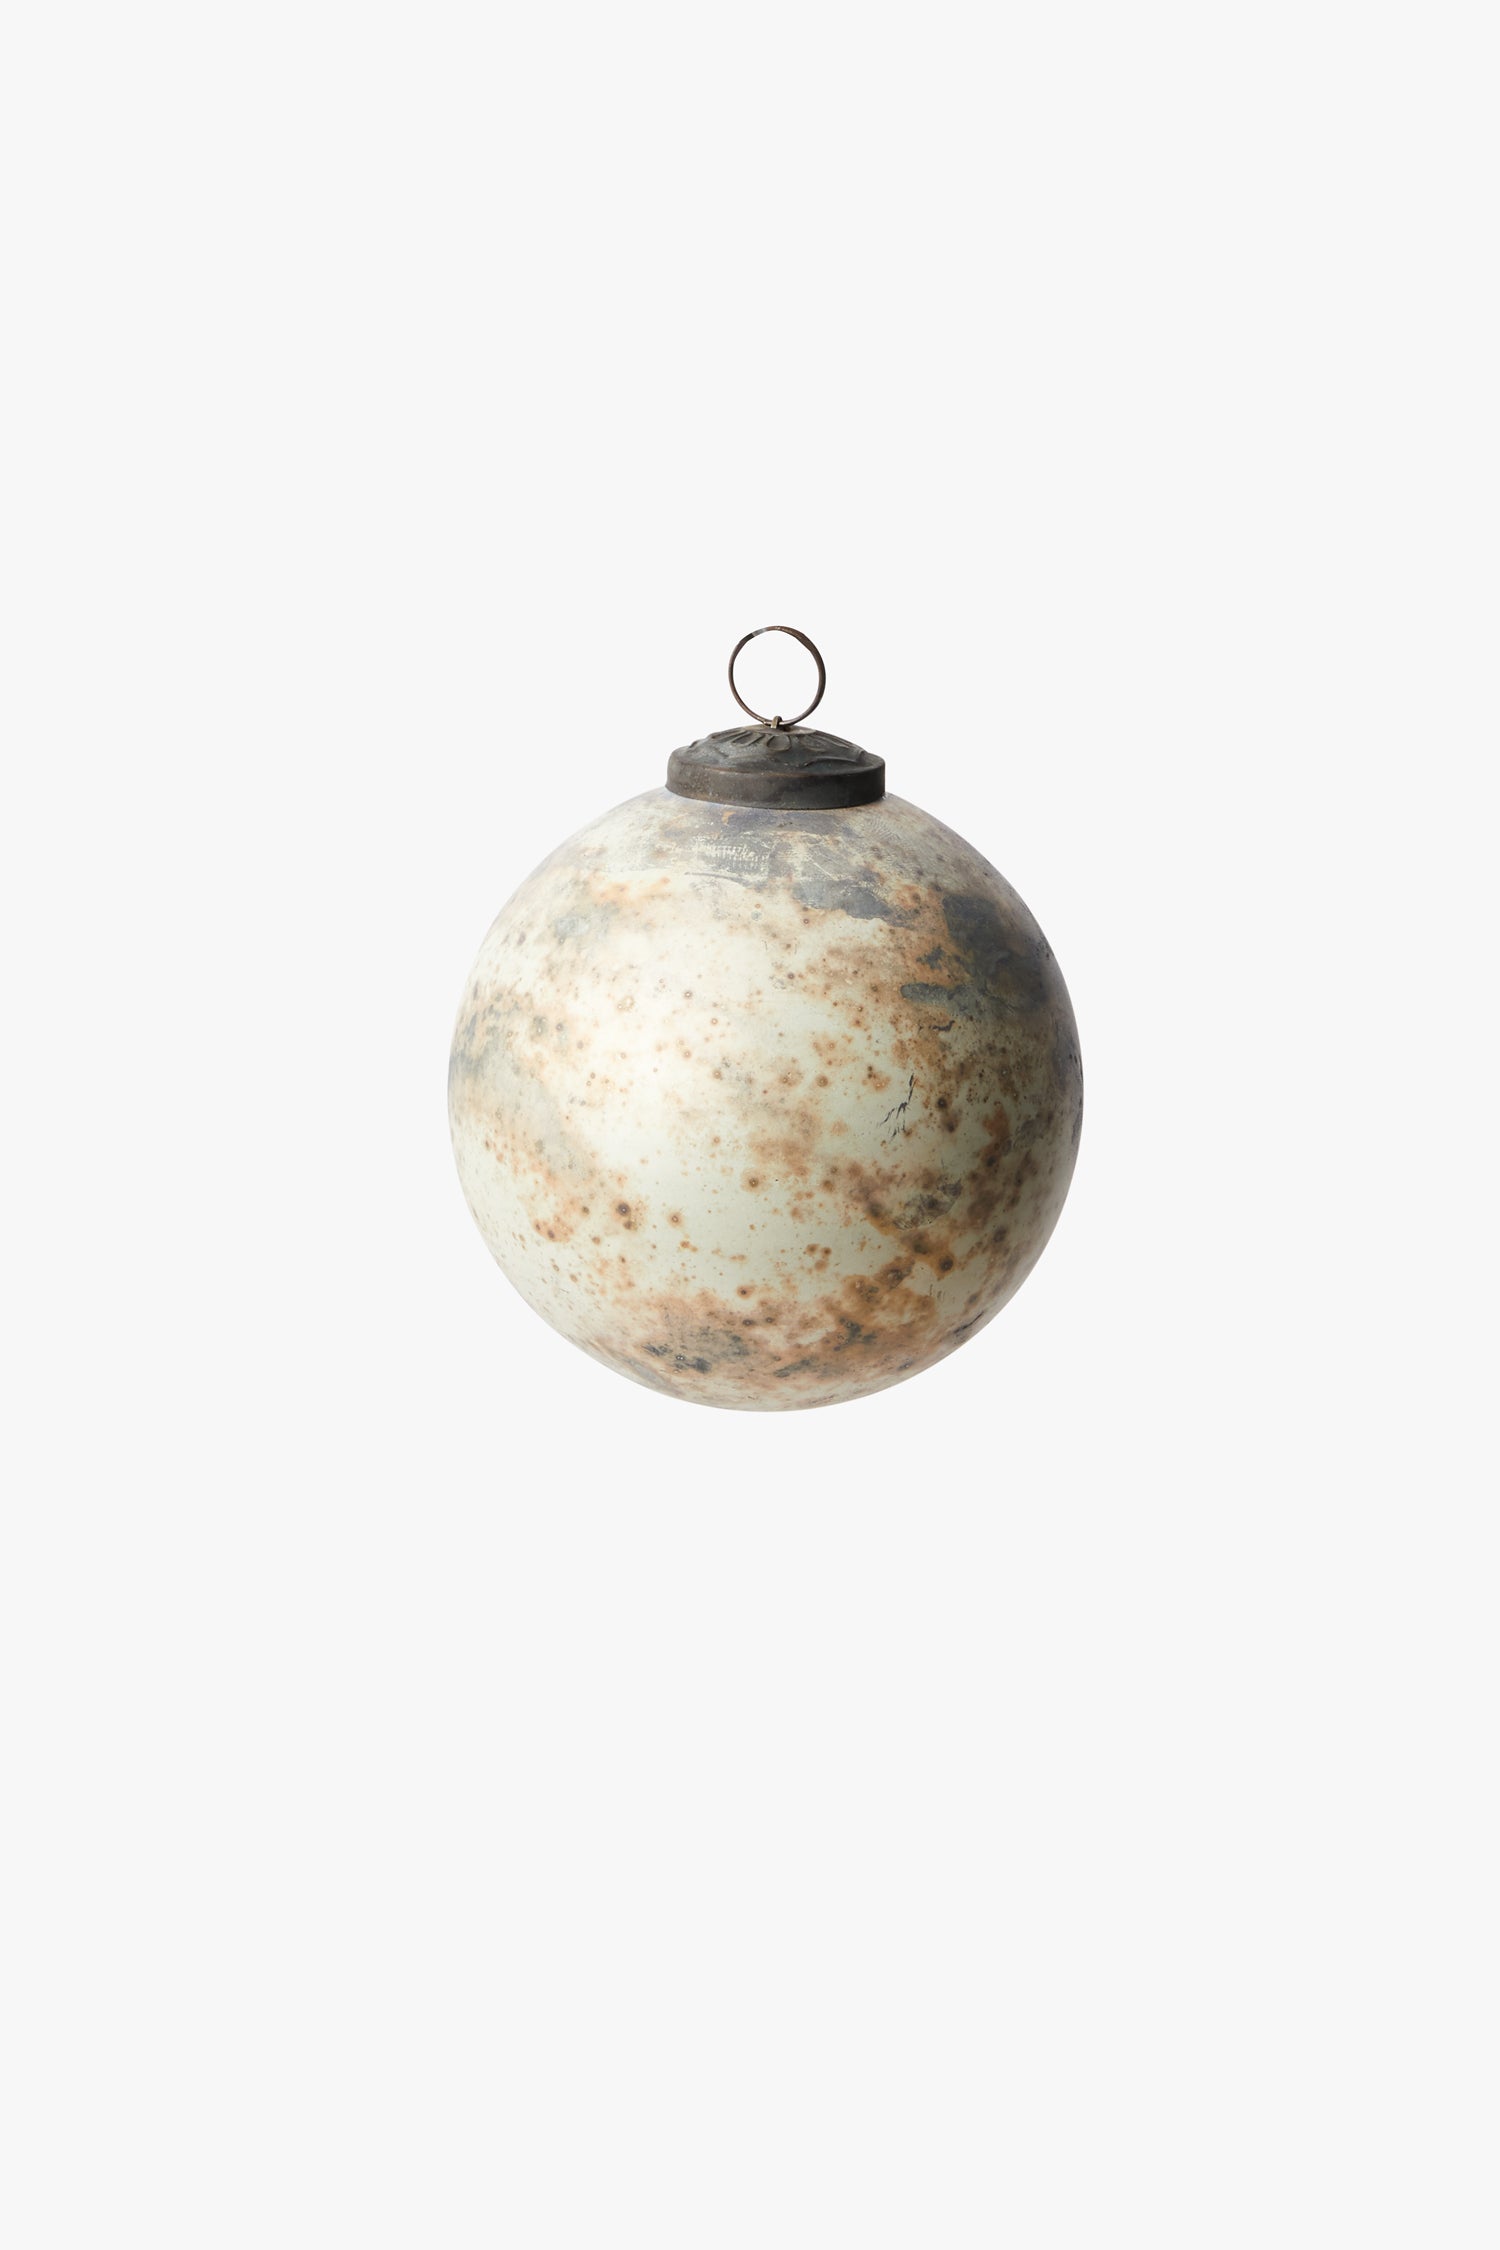 French Connection - Saturn Antique Bauble | French Connection |  Seasonal & Holiday Decorations | One size - Bronze - Size: OS